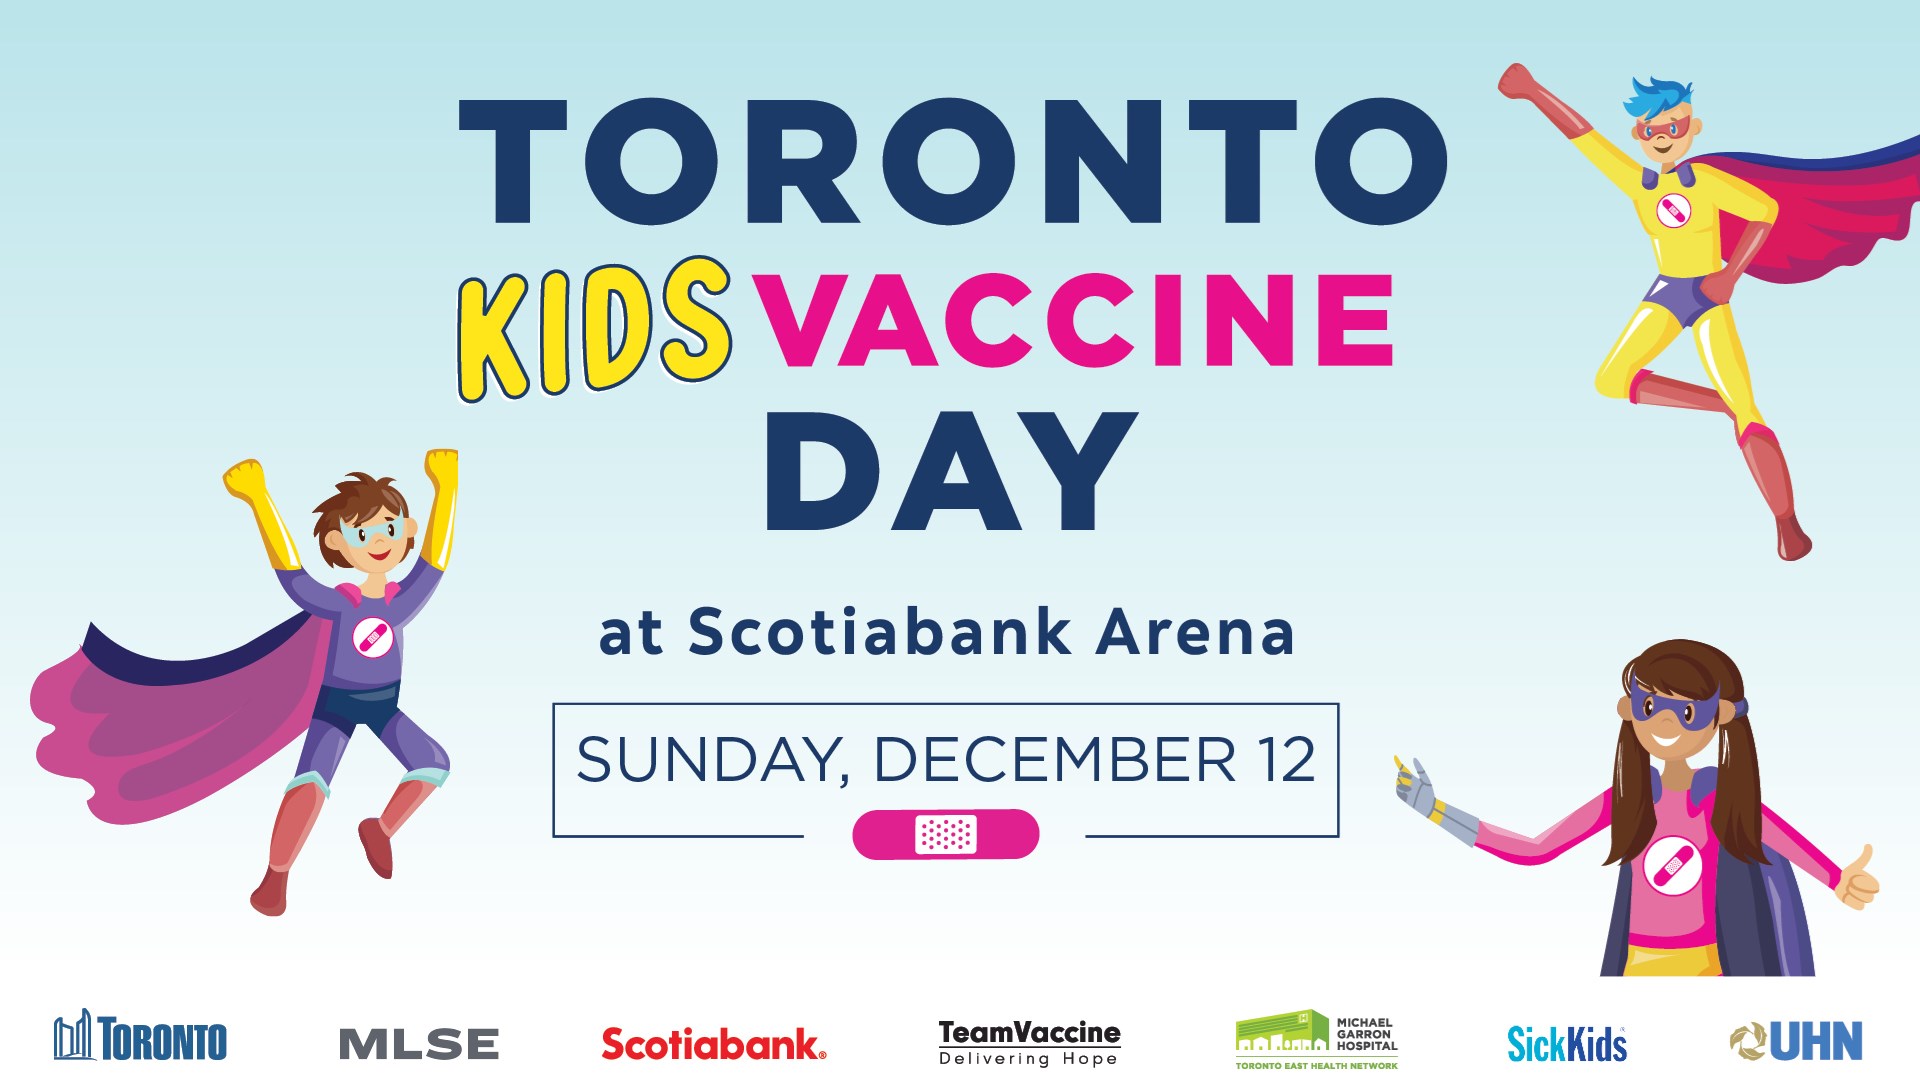 Poster that reads Toronto Kids Vaccine Day at Scotiabank Arena, Sunday, December 12. Three superheroes surround the text. Logos at the bottom for City of Toronto, Maple Leaf Sports Entertainment, Scotiabank, Team Vaccine, Michael Garron Hospital, SickKids, University Health Network.